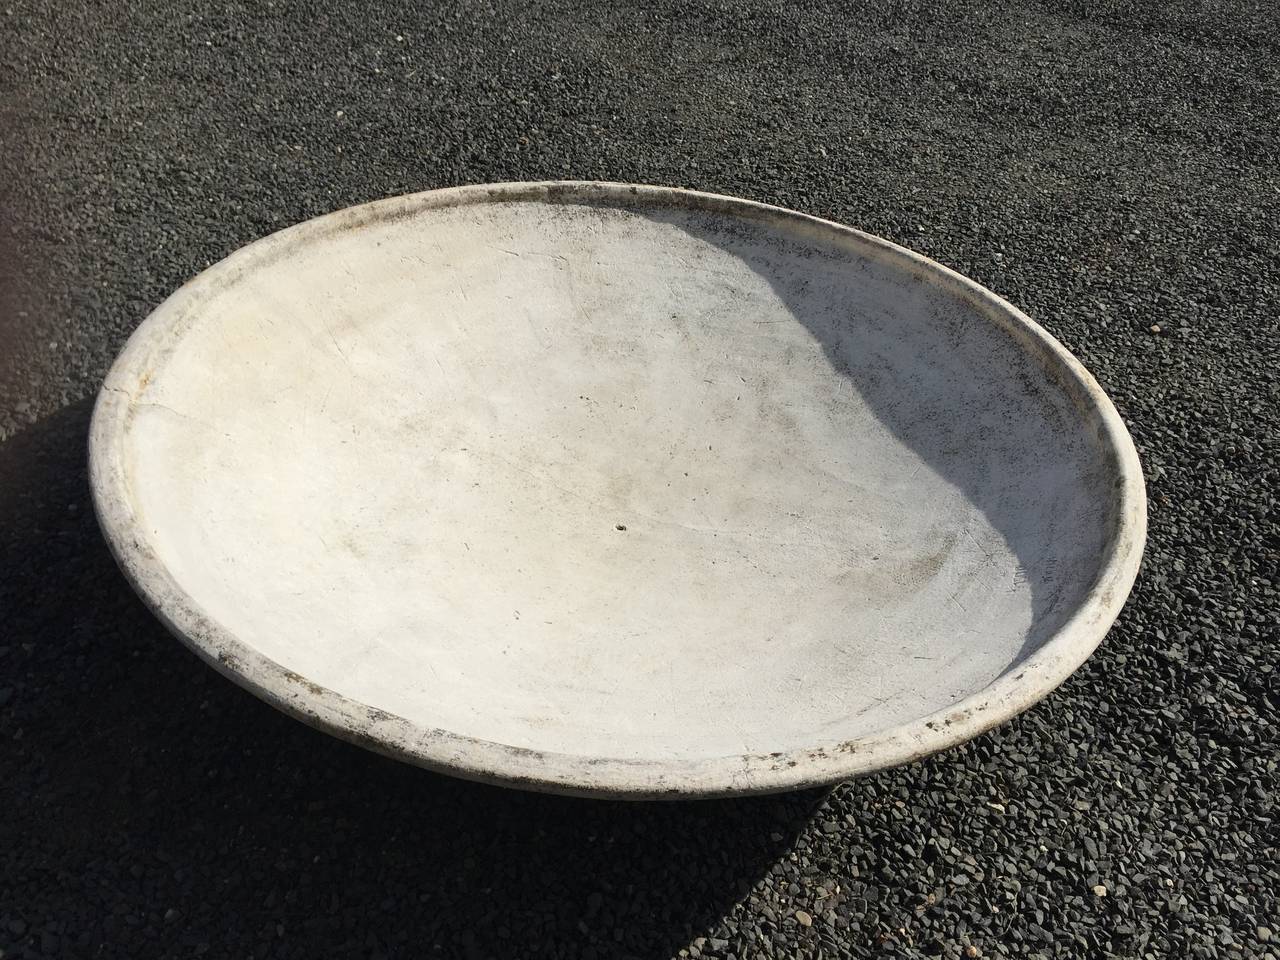 This rare saucer-form planter was designed by Willy Guhl for Eternit and produced, circa 1960. The largest Guhl model ever made, it is incised with production numbers, in original light-weathered surface, and is in excellent condition. Potted up